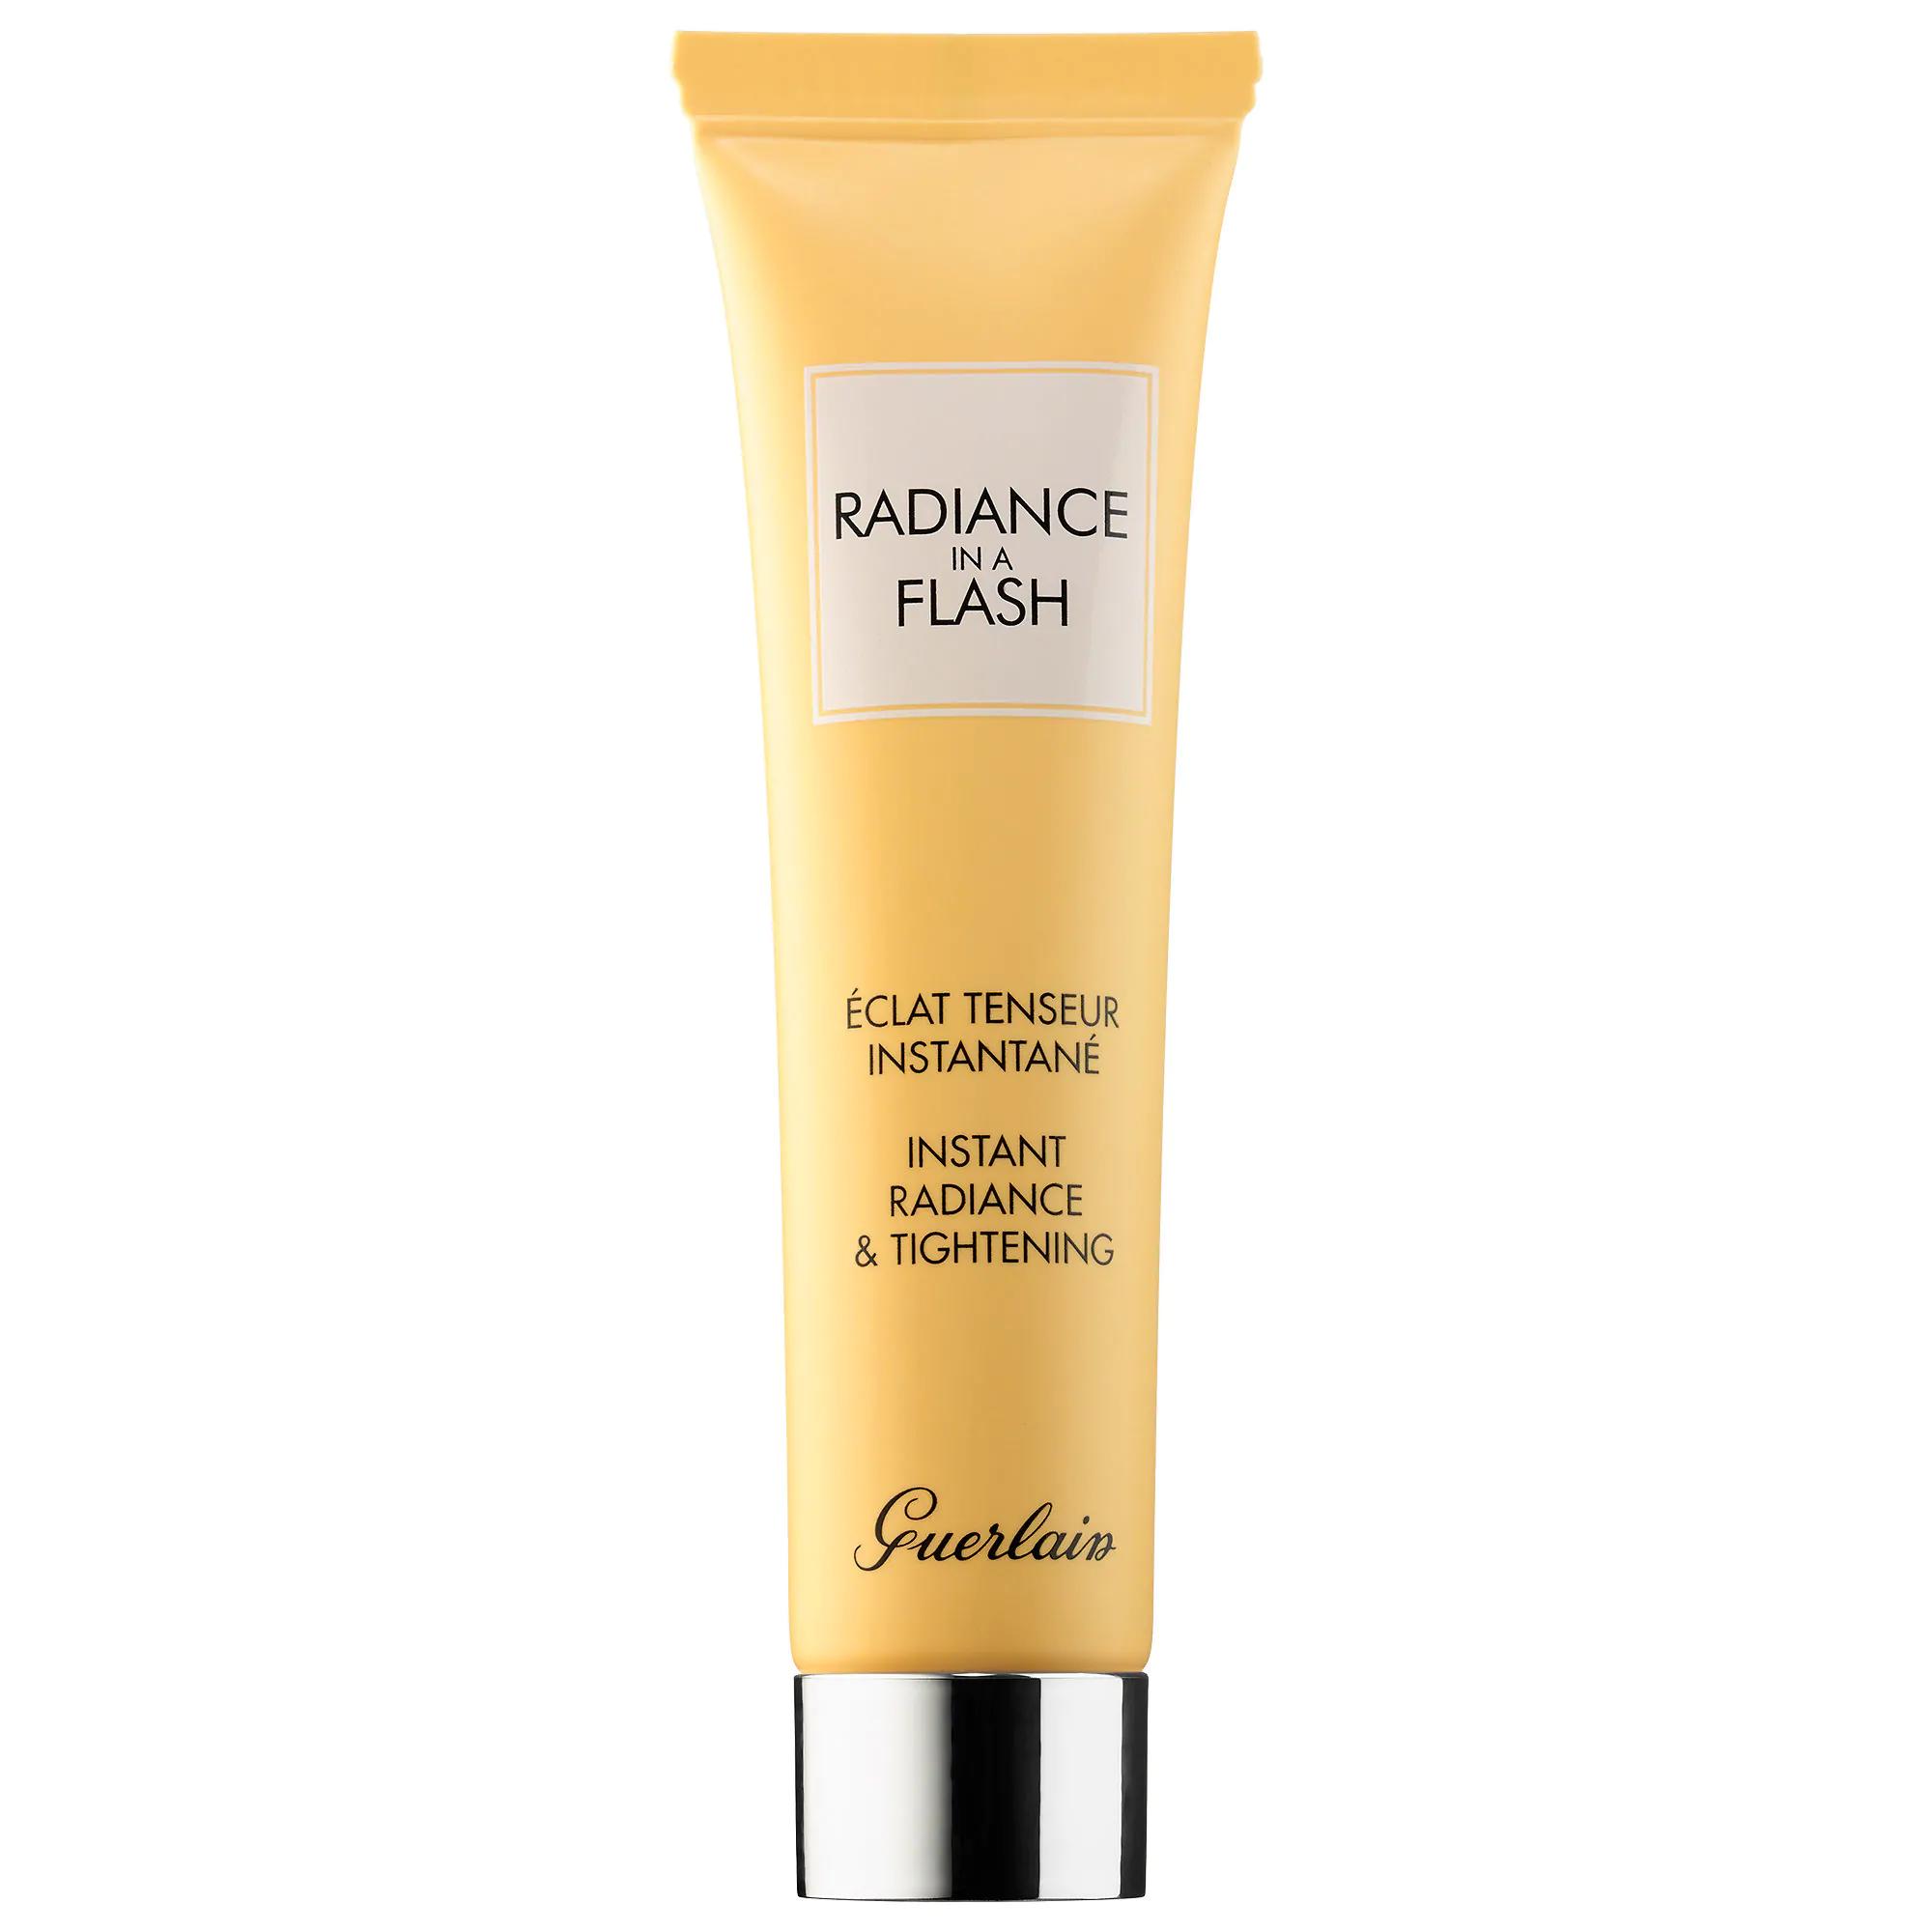 Guerlain Radiance in a Flash Instant Radiance & Tightening